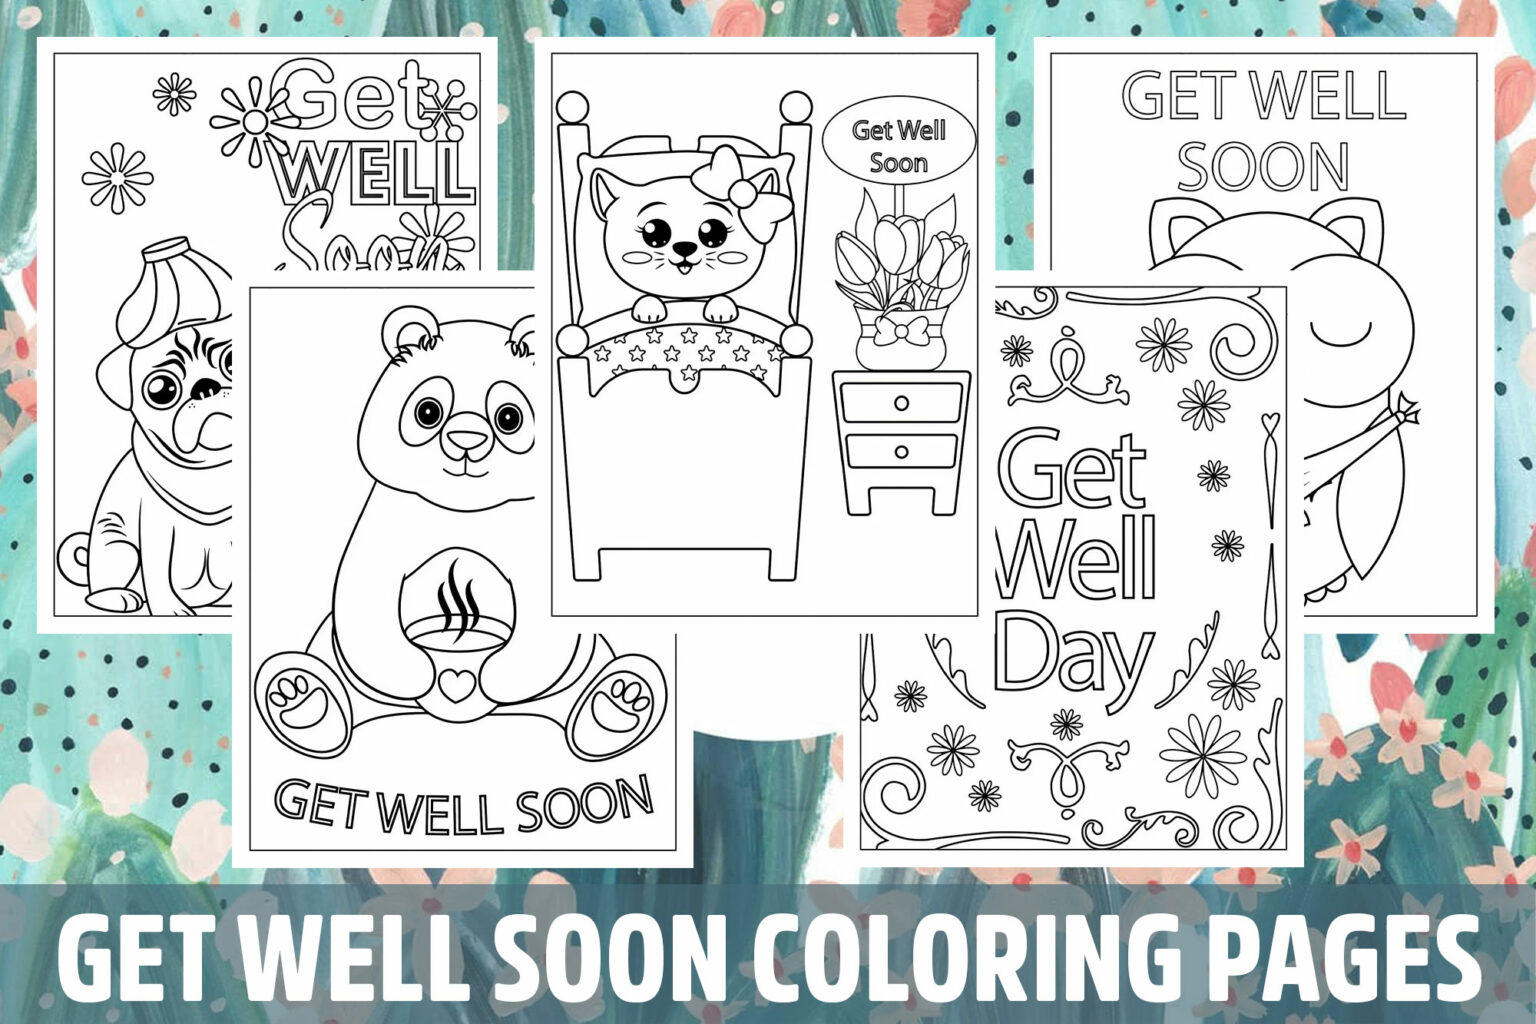 Get well soon coloring pages for kids girls boys teens birthday school activity made by teachers